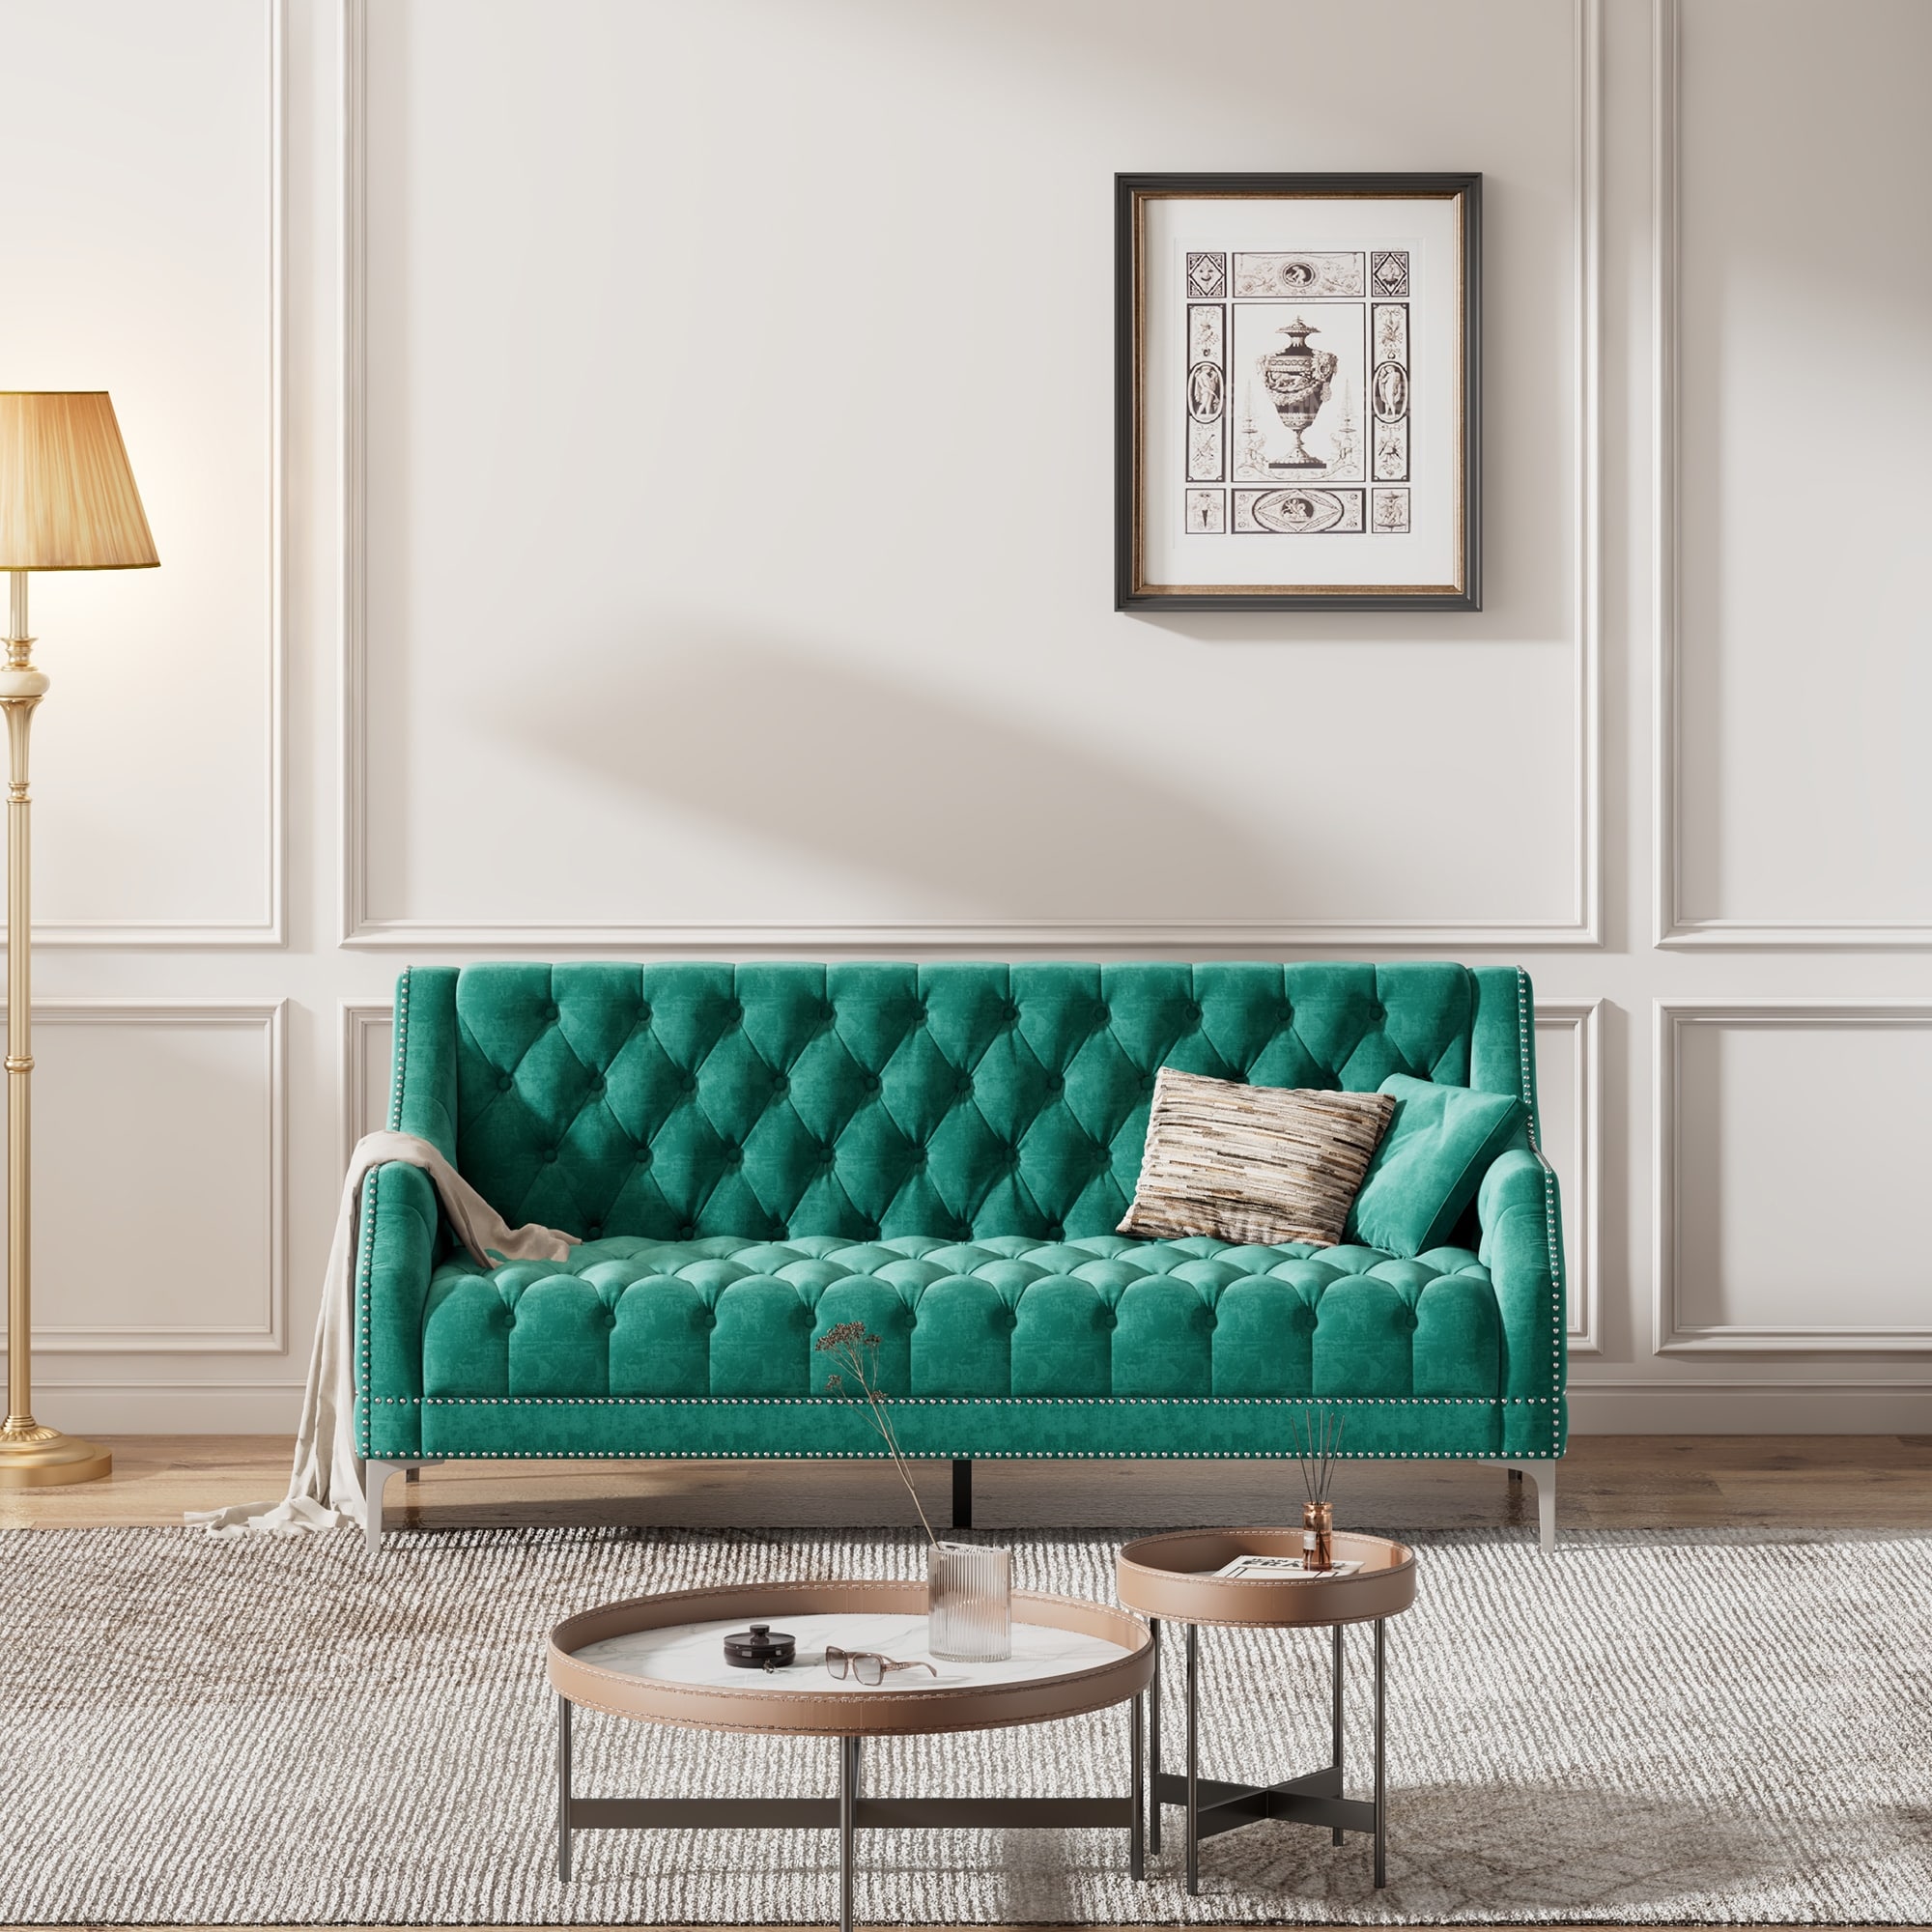 3-seater Sofa Dutch Plush Upholstered Sofa With Buttoned Tufted Backrest And Sloped Arms Nailhead Trim Design  Metal Legs